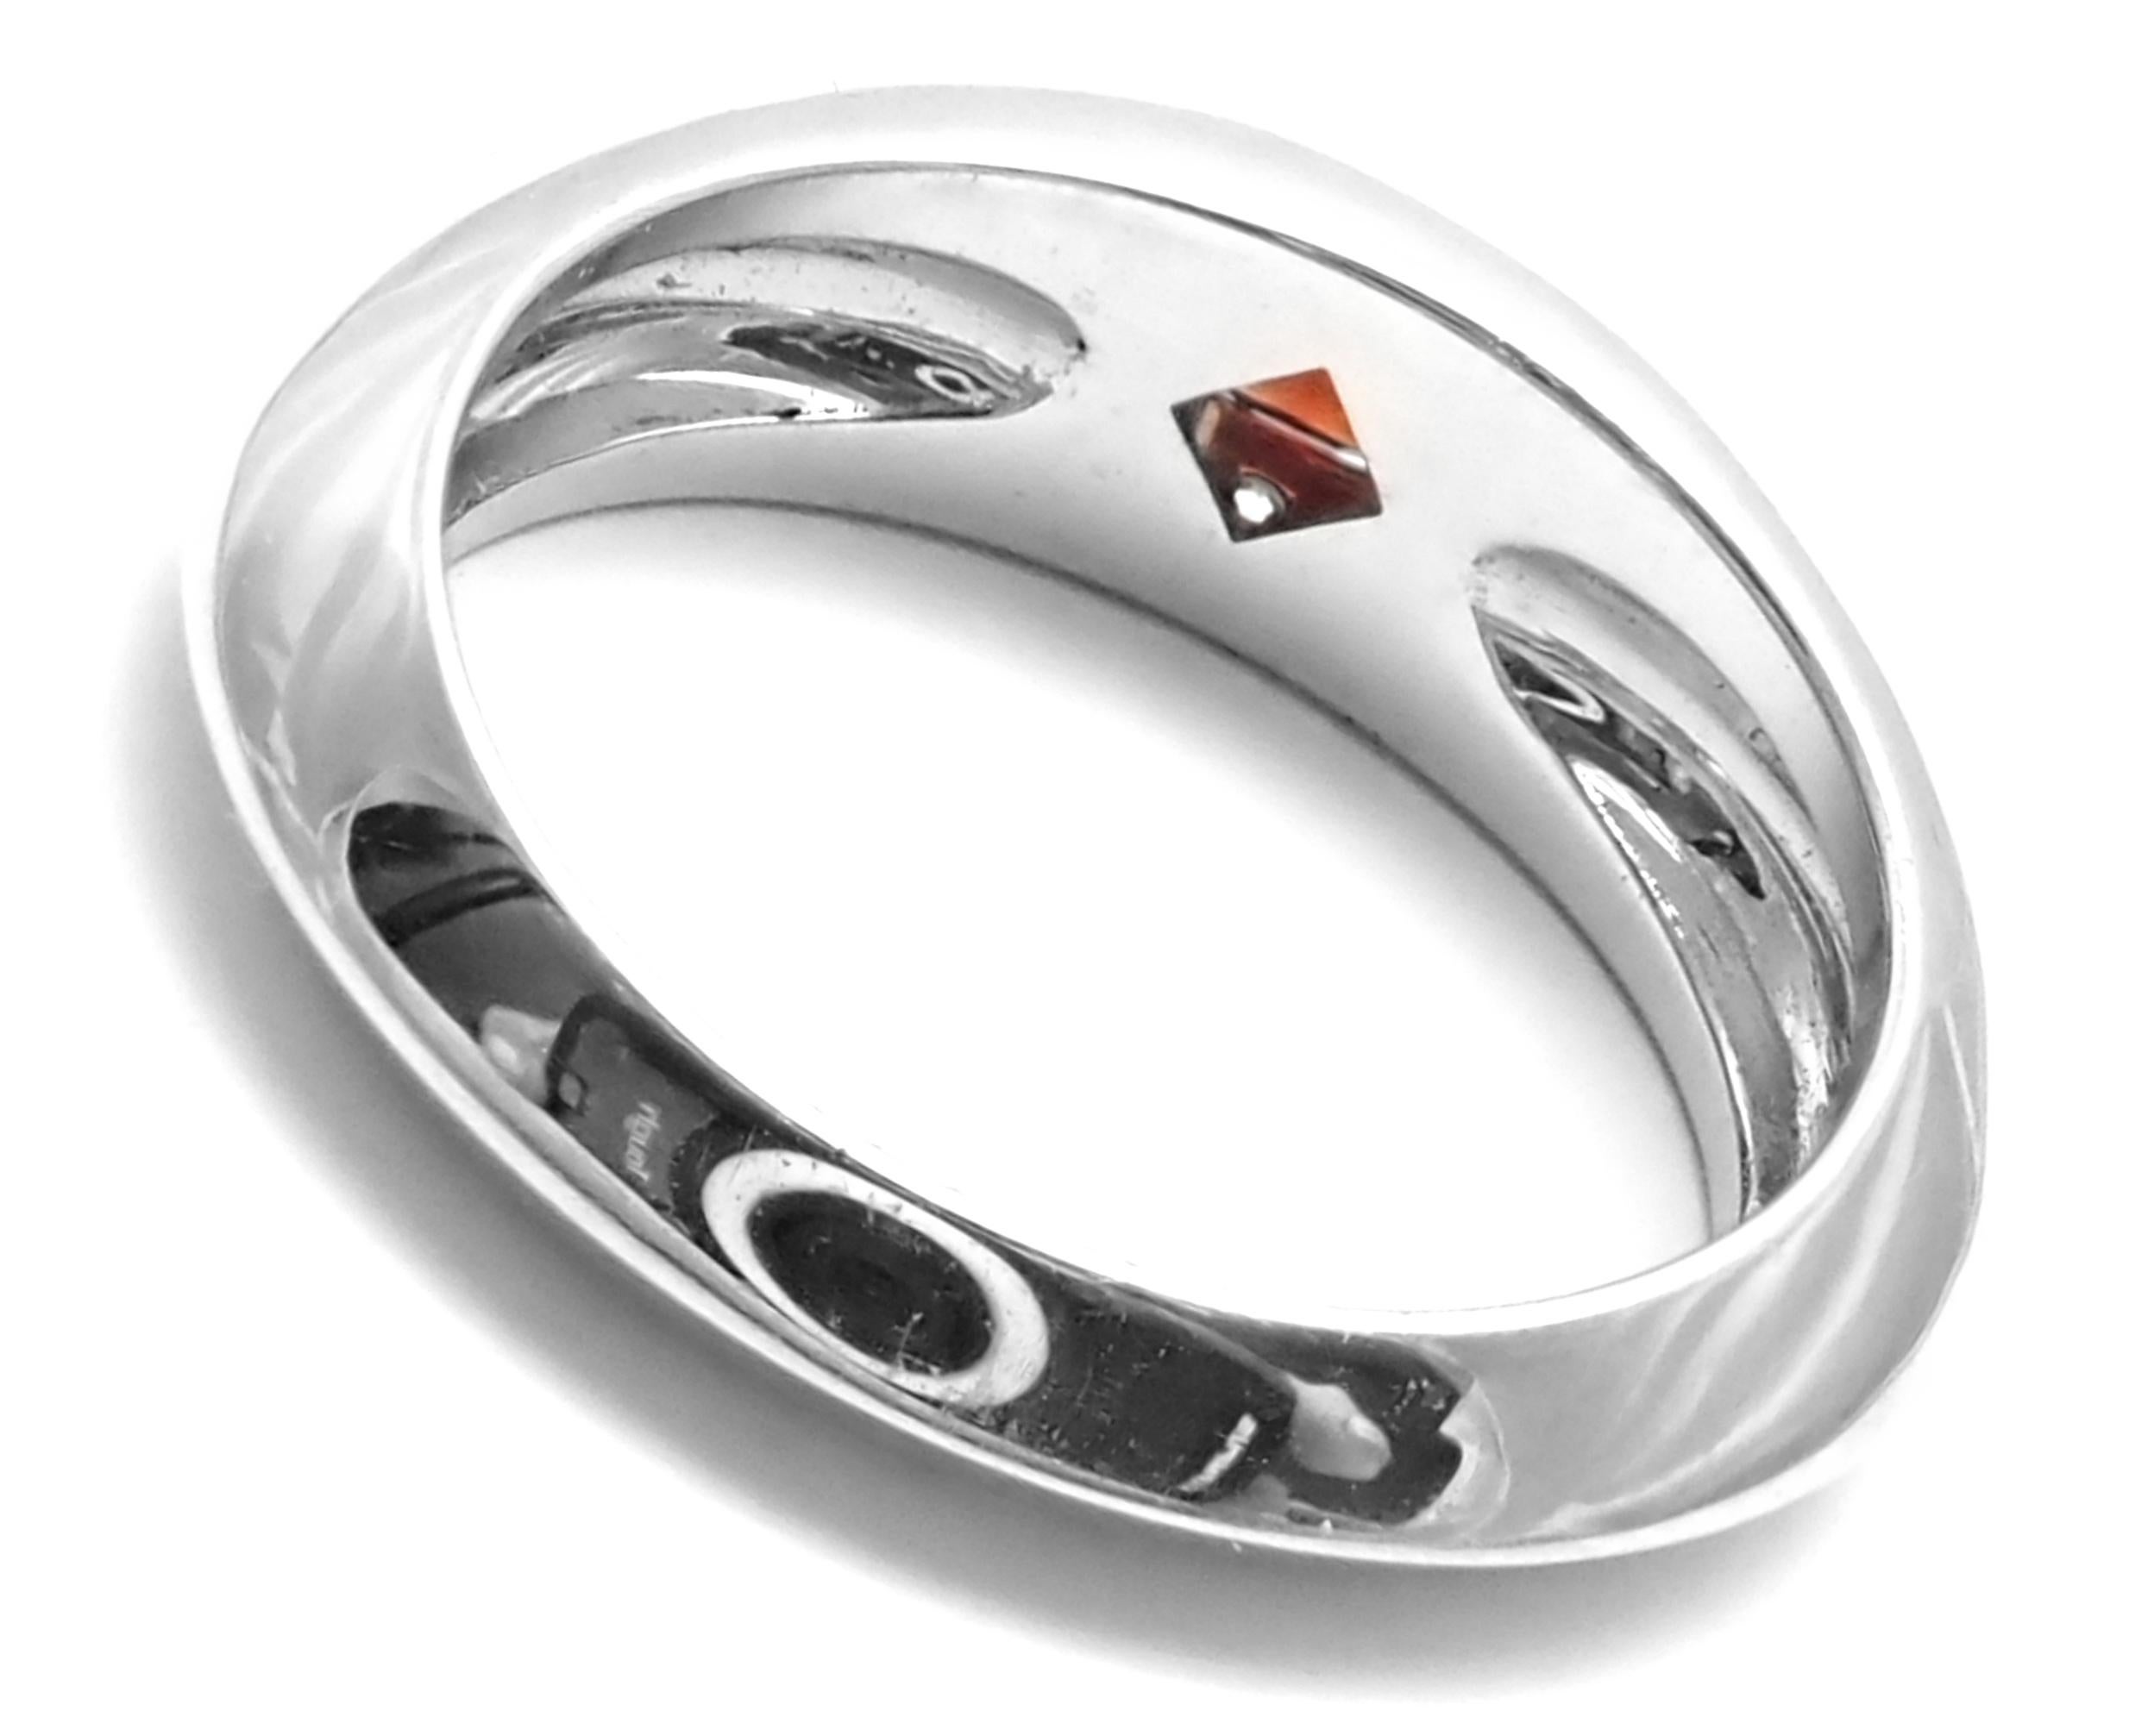 Piaget Diamond Garnet Modern Dome White Gold Band Ring In Excellent Condition For Sale In Holland, PA